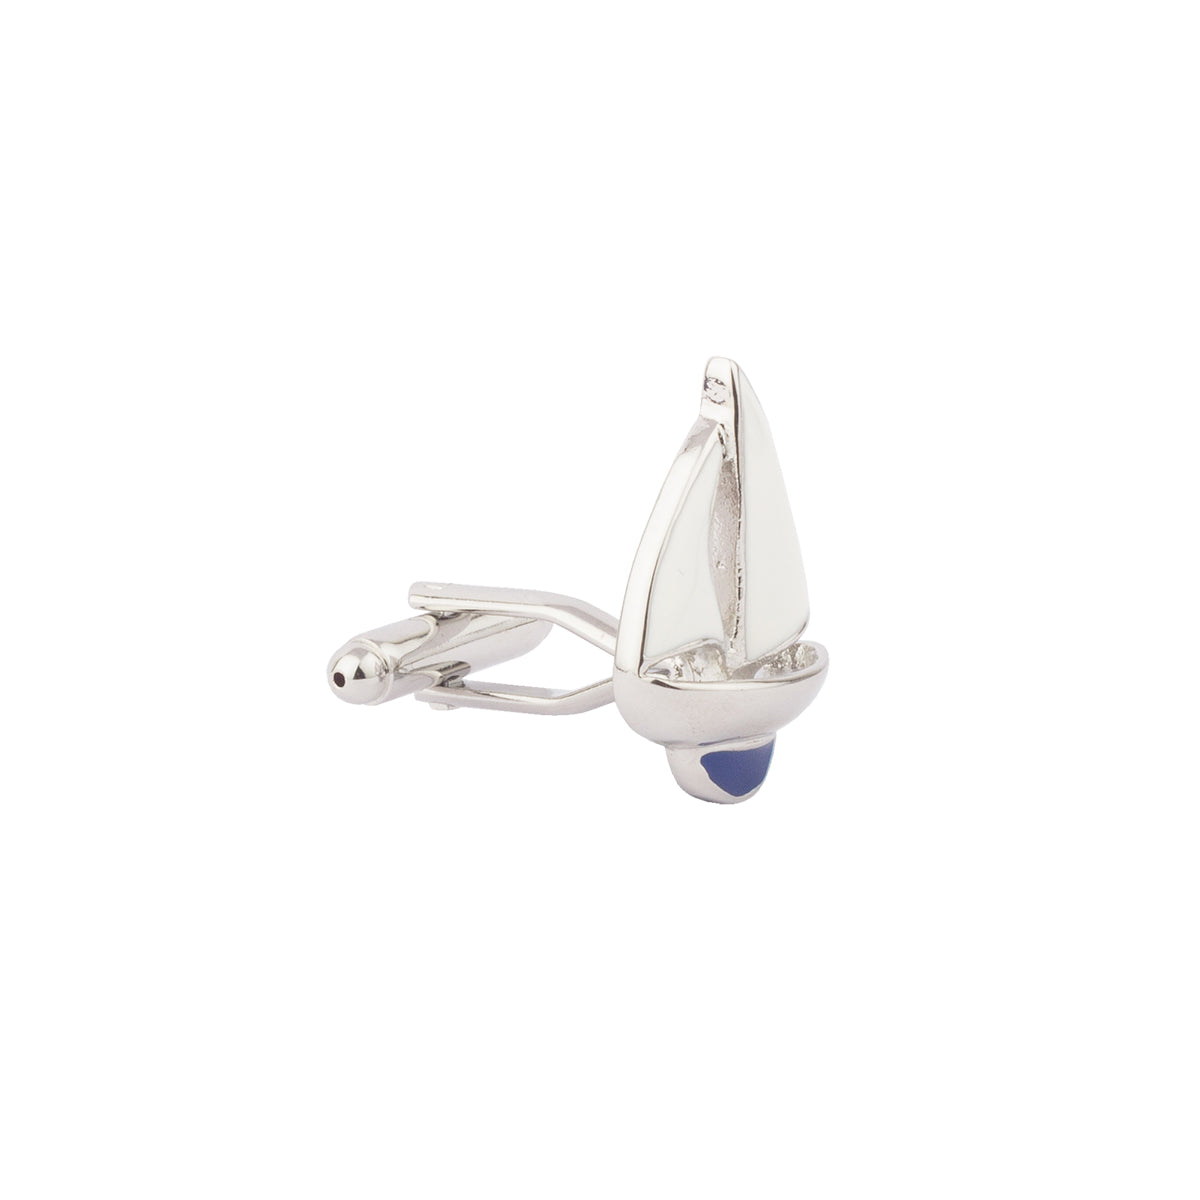 Sail With Style cufflinks